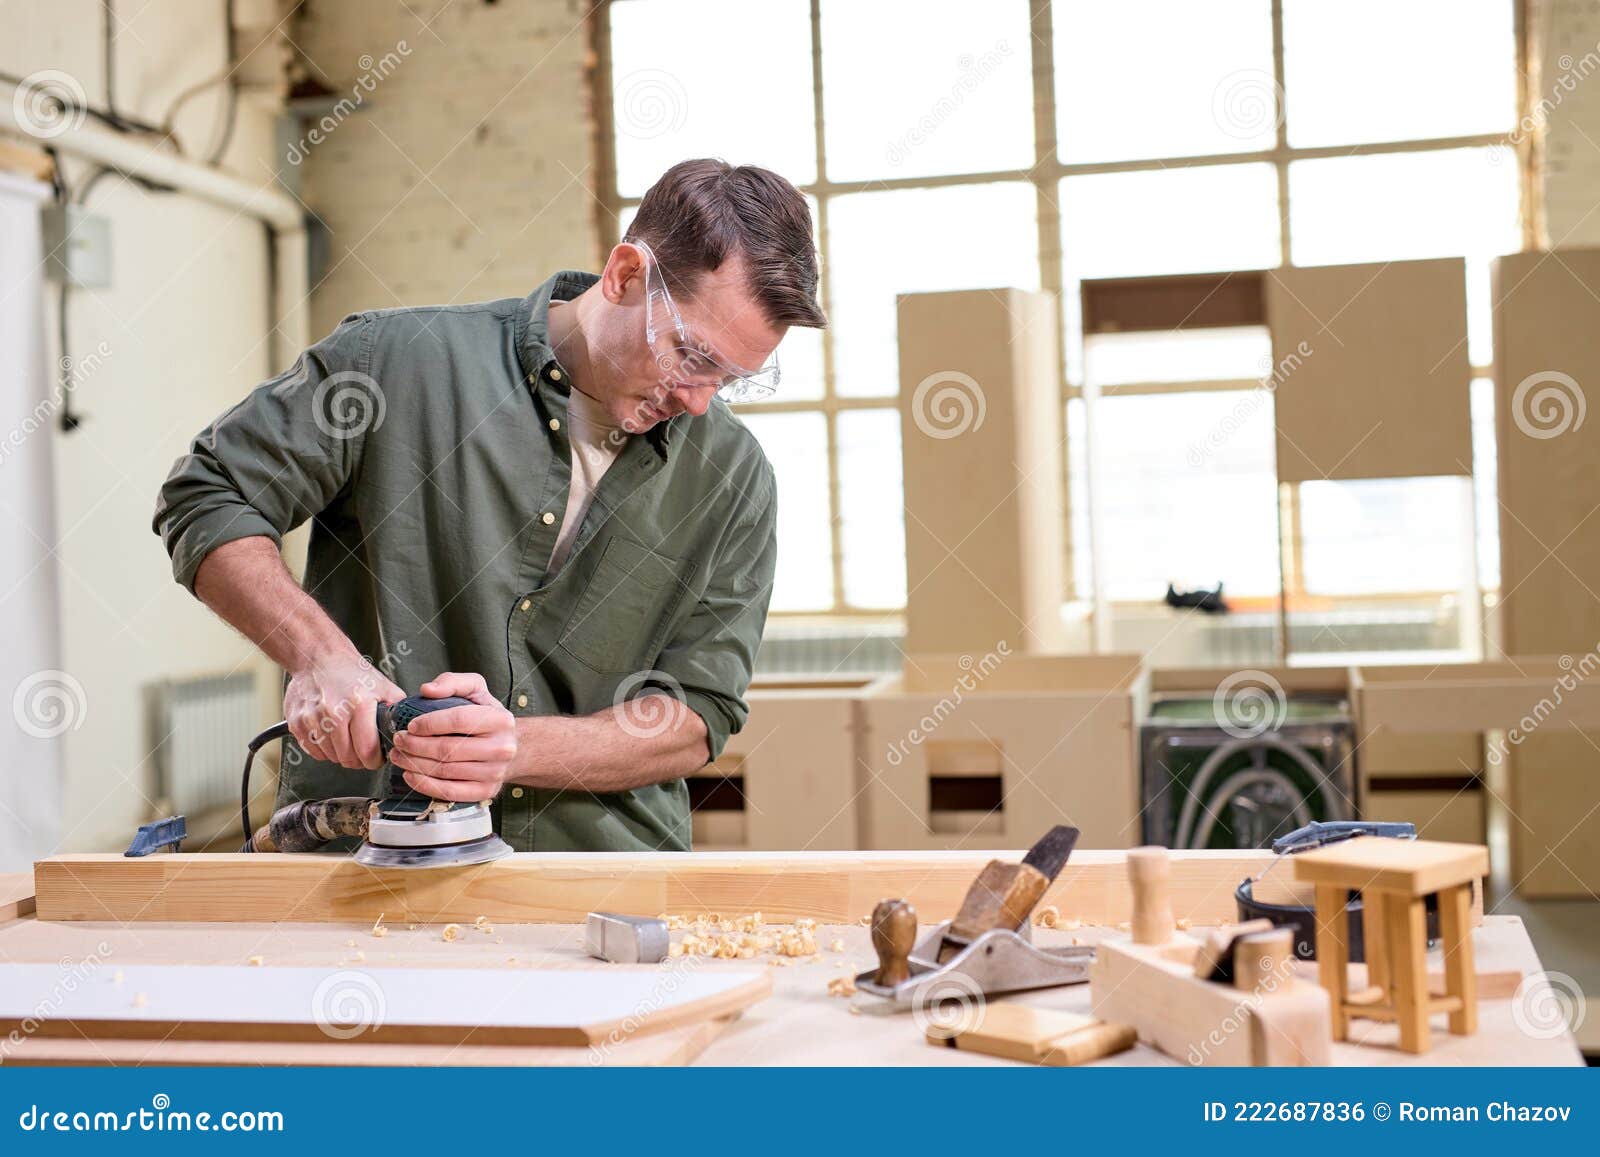 Talented Carpenter Photos Free Royalty Free Stock Photos From Dreamstime